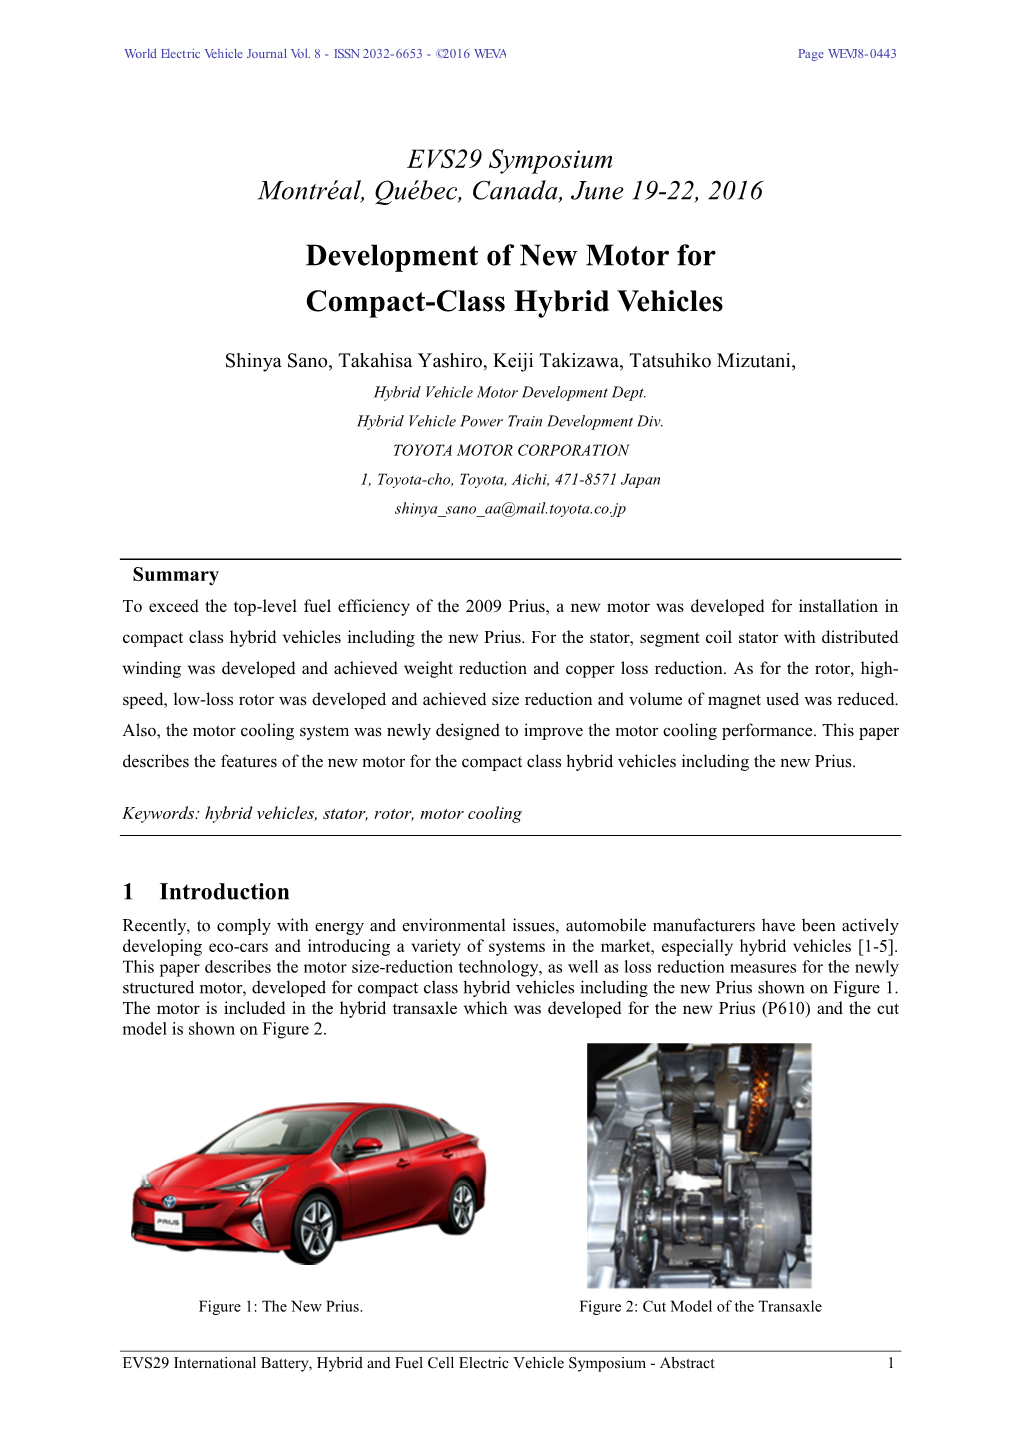 Development of New Motor for Compact-Class Hybrid Vehicles